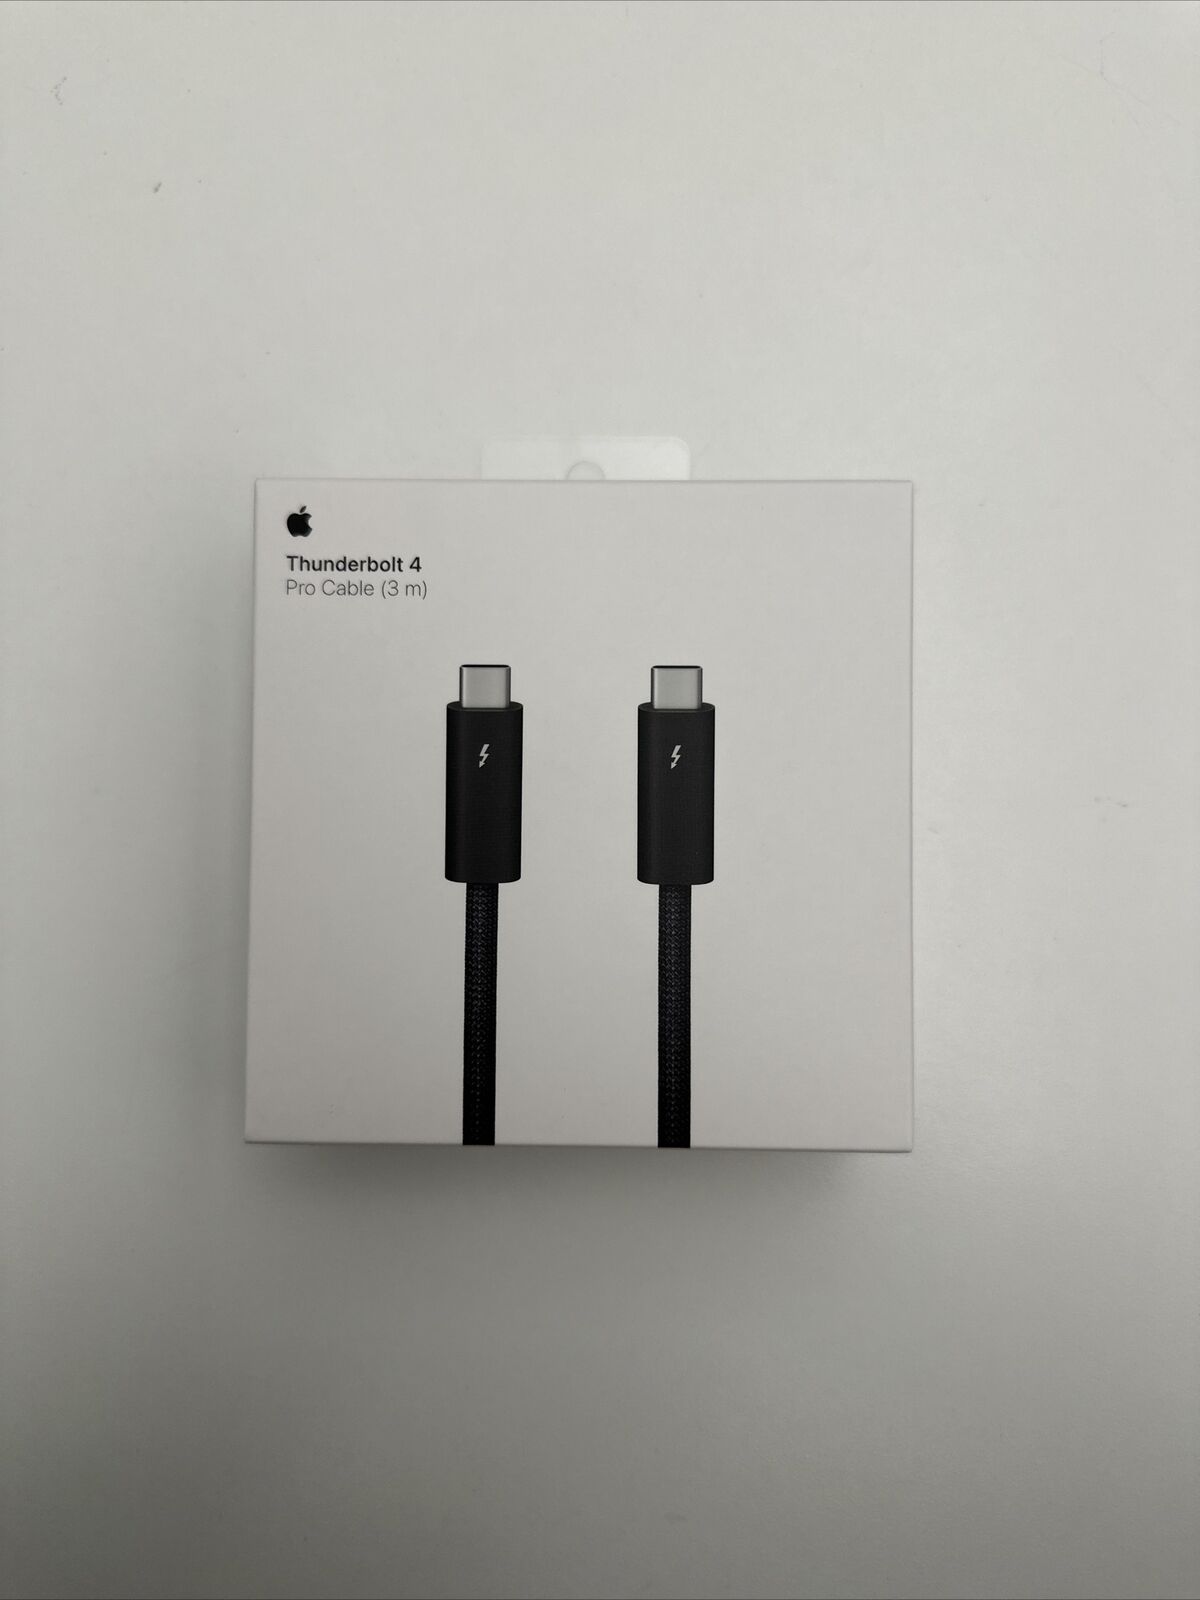 Apple Thunderbolt 4 Pro Cable for Mac/iPad/Display, 3 Meters, New Sealed